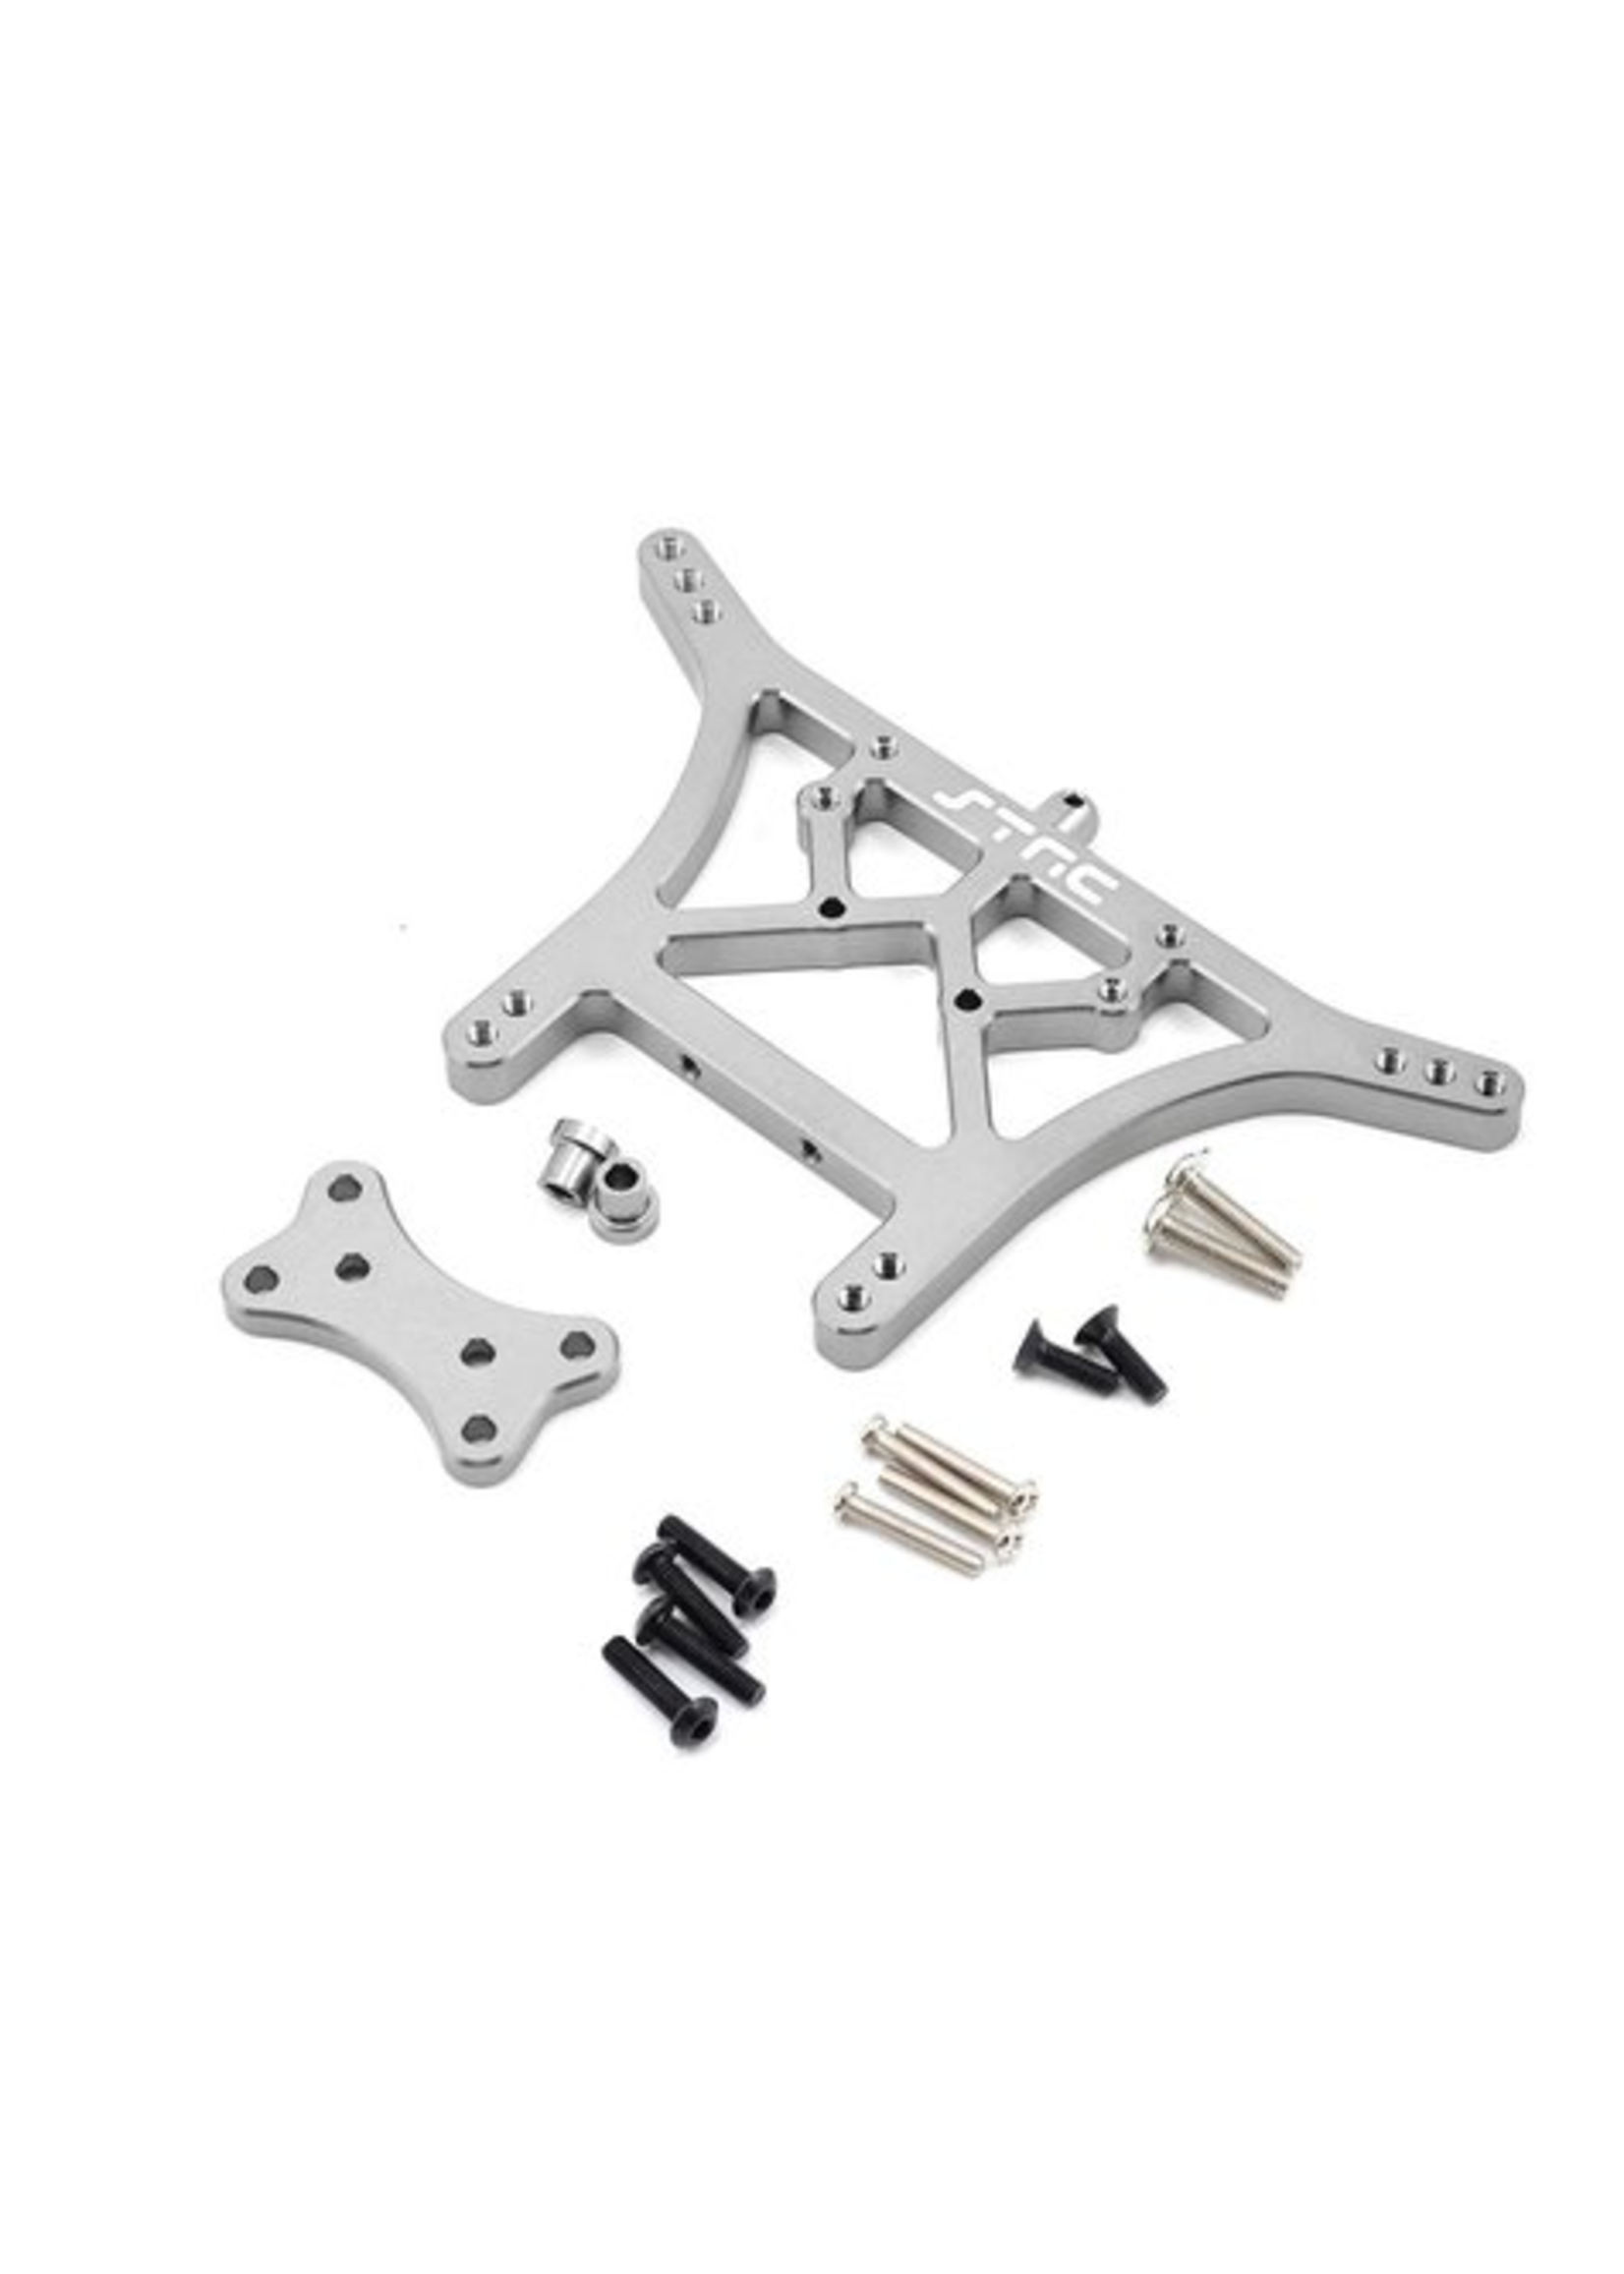 ST Racing Concepts SPTST3638S ST Racing Concepts Aluminum 6mm Heavy Duty Rear Shock Tower for Traxxas Stampede/Rustler/Bandit/Slash (Silver)